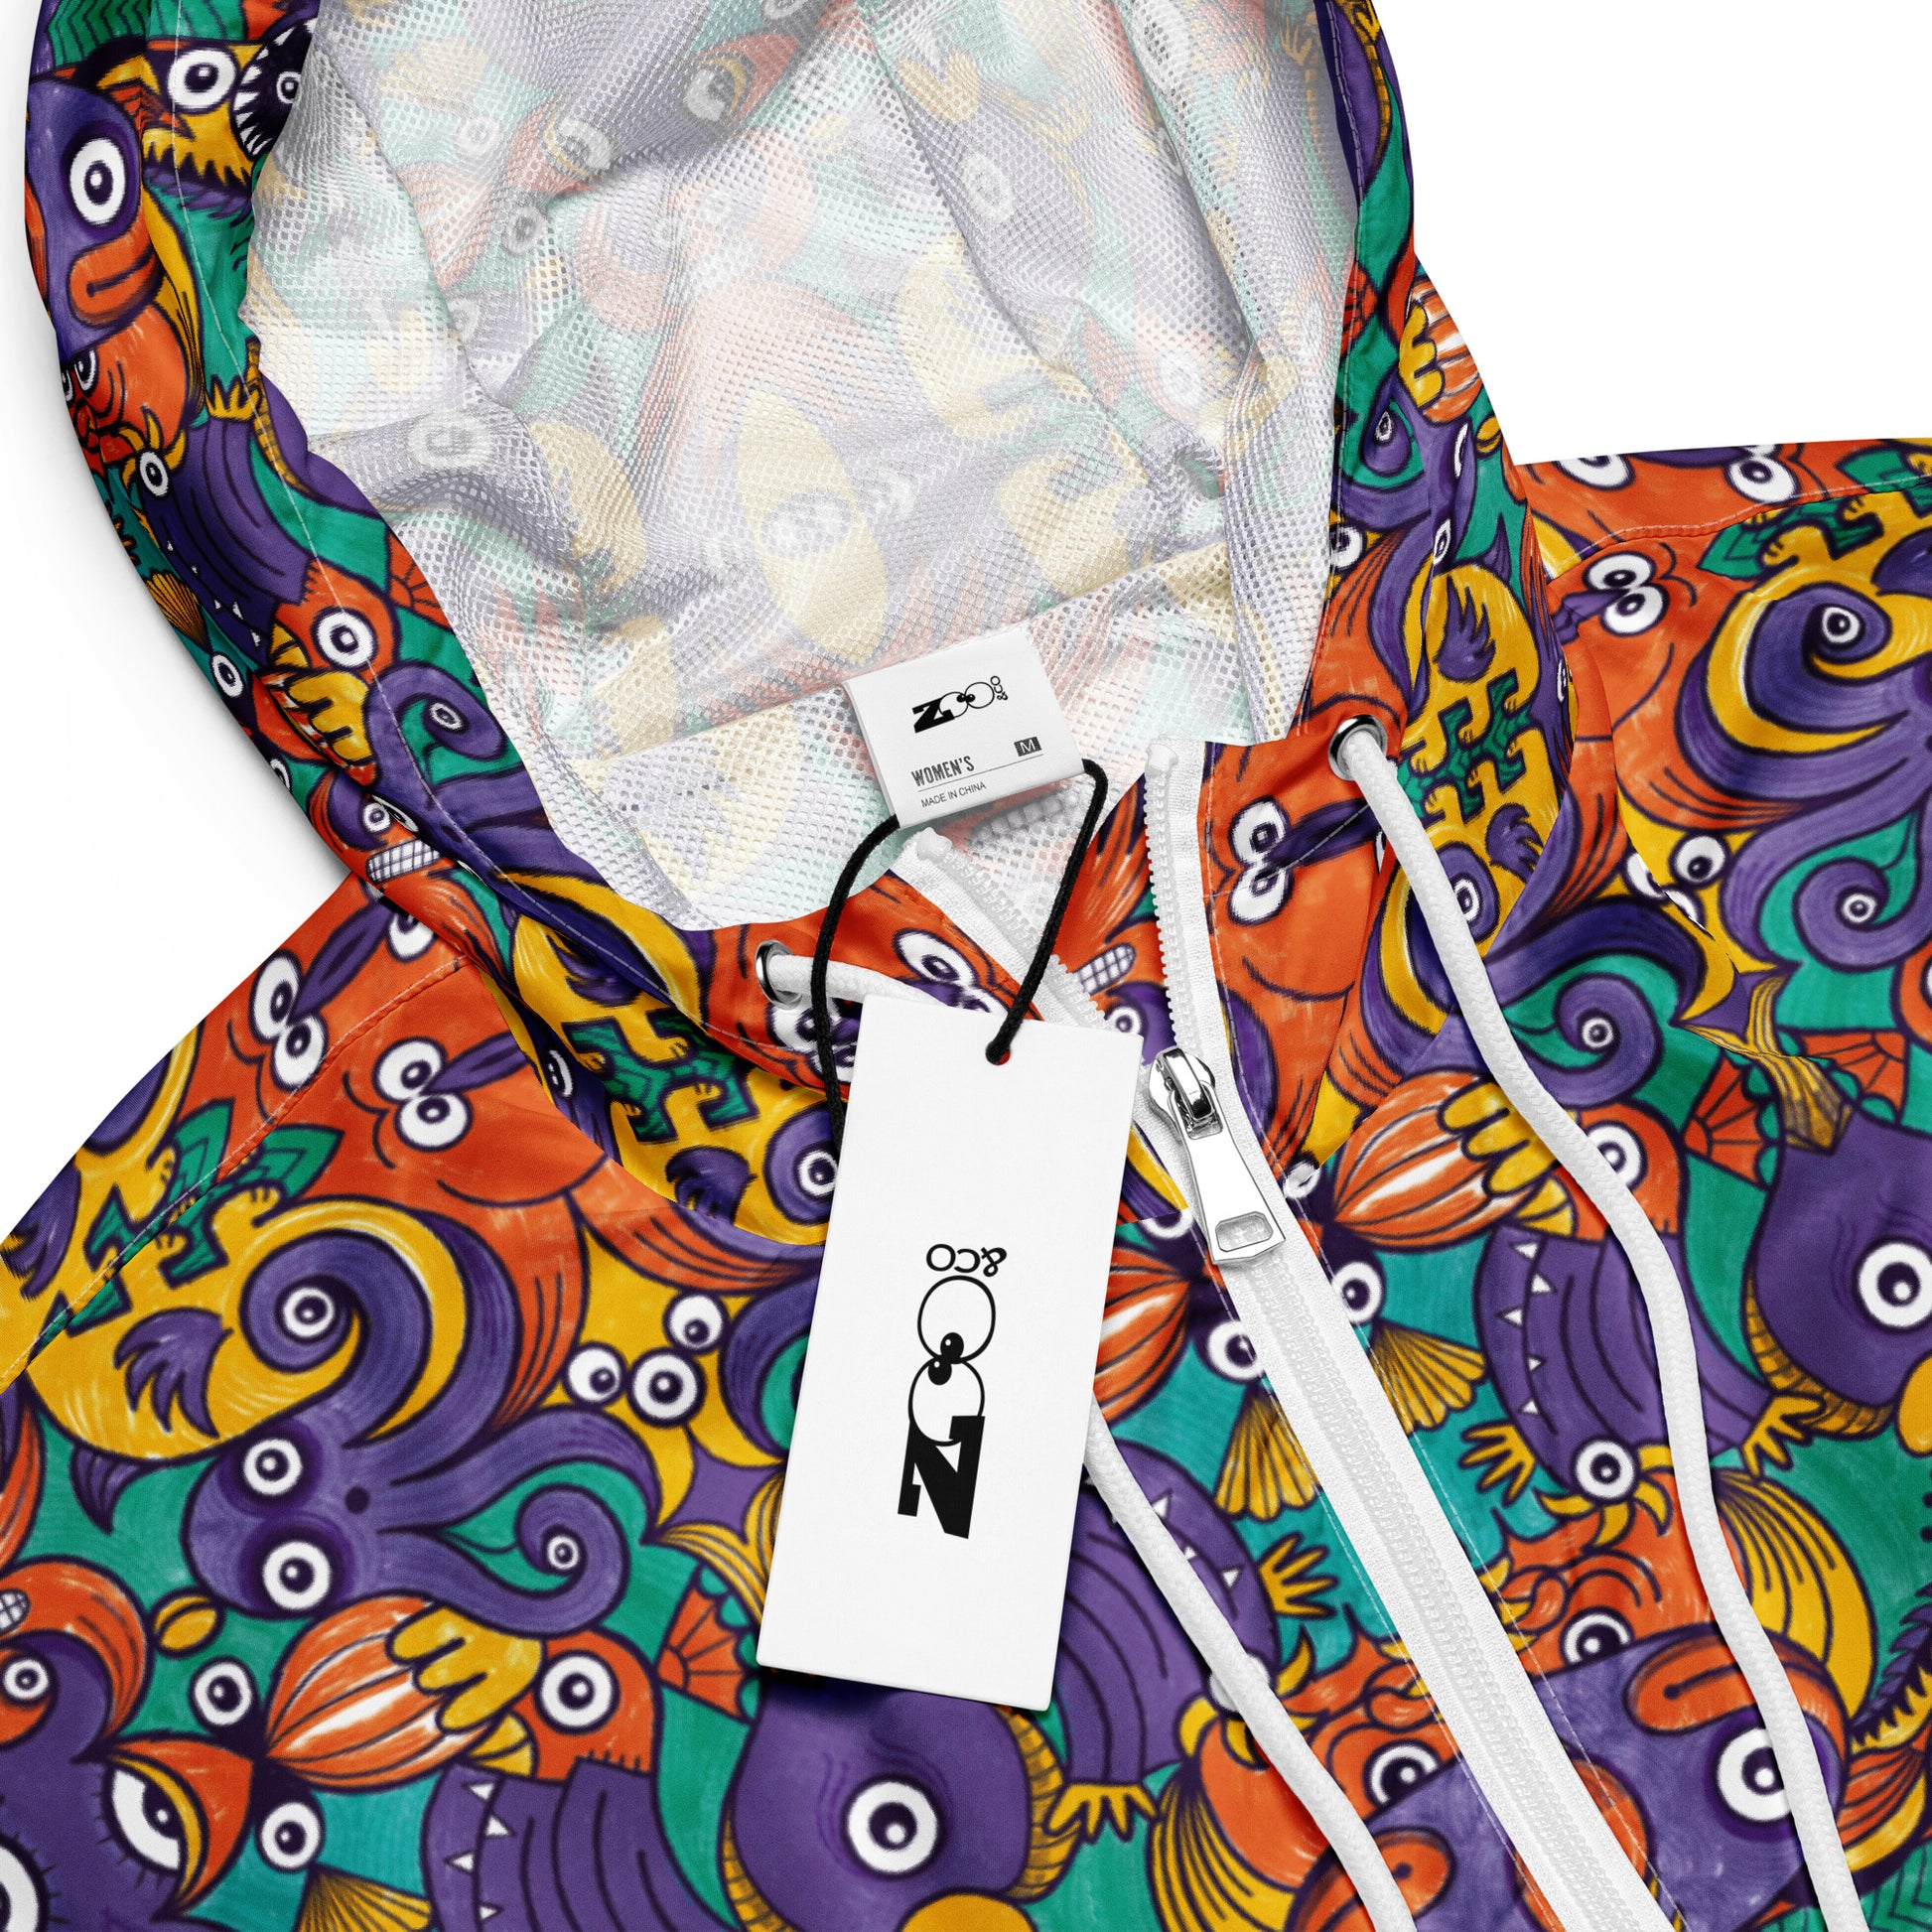 Dive into Whimsical Waters: An Undersea Odyssey - Women’s cropped windbreaker. Product details